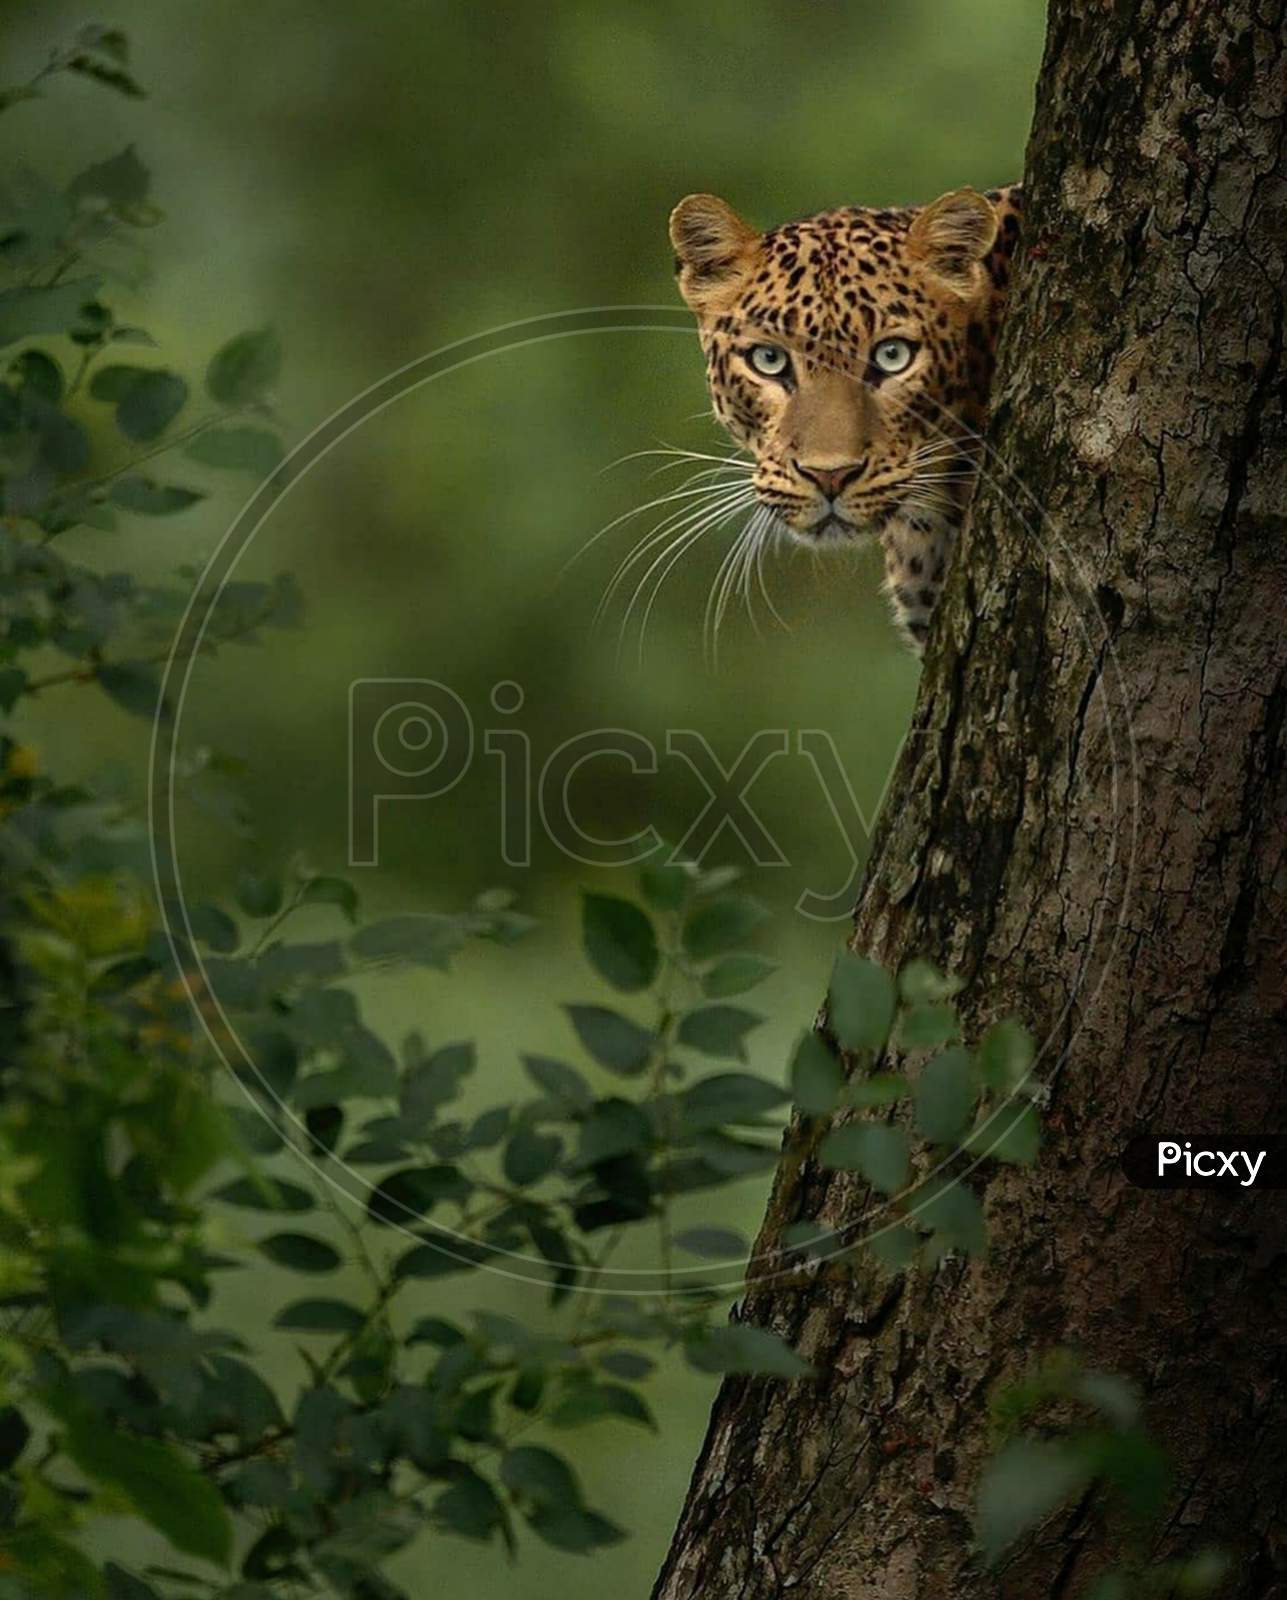 Leopard watching us silently